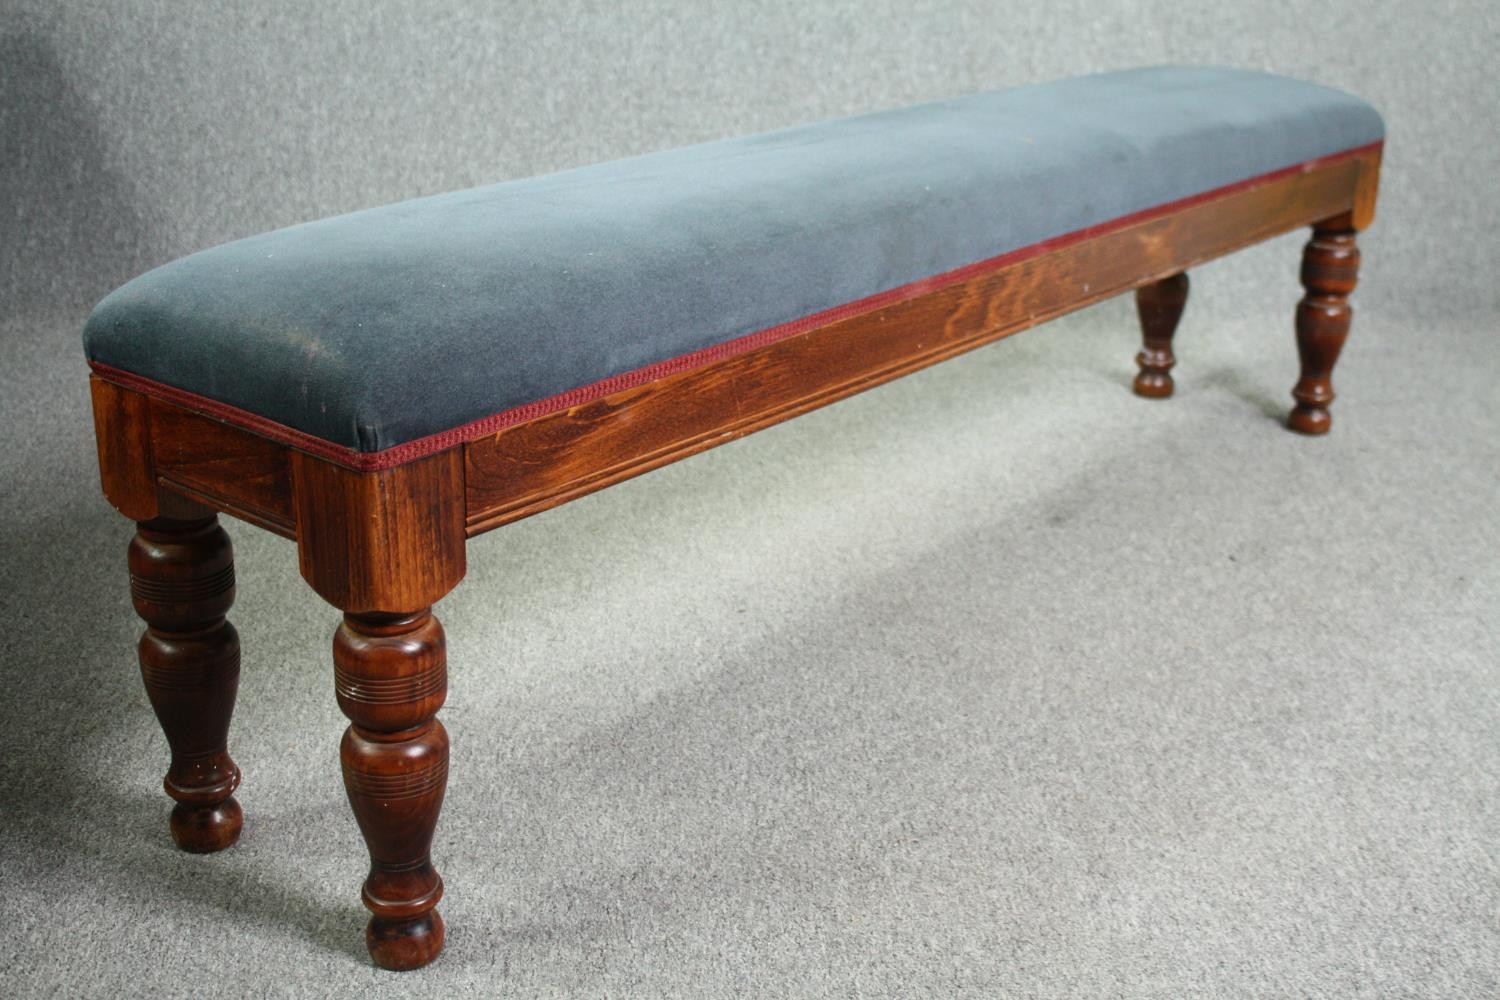 Window seat or hall bench, 19th century stained pine. H.53 W.182 D.36cm. - Image 3 of 5